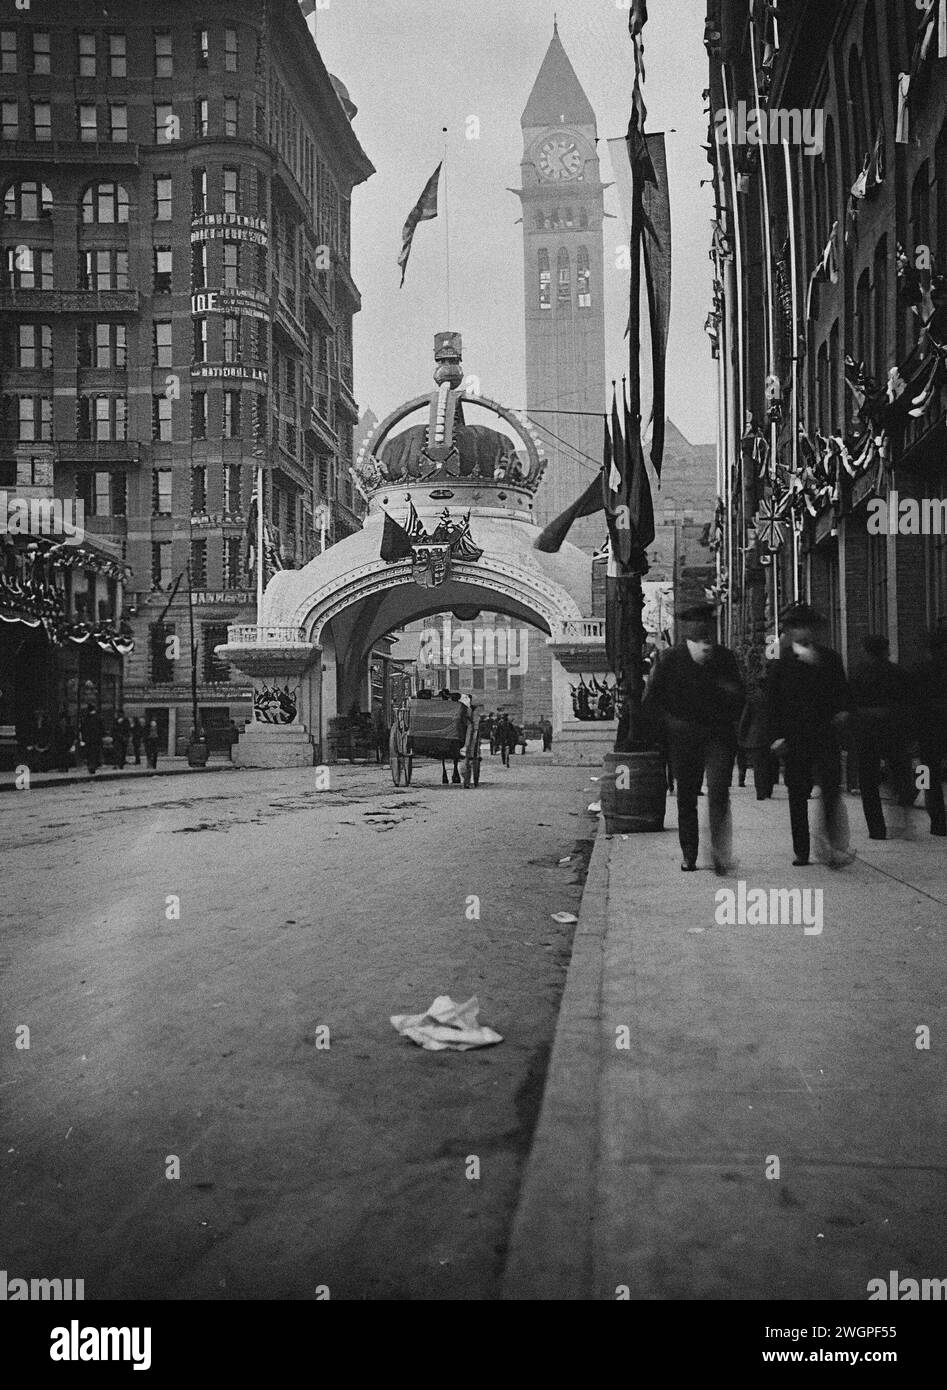 The view looking North up Bay to City Hall in Toronto in 1901.  The large arch celebrating the arrival of the Duke and Duchess of Cornwall and York. Stock Photo